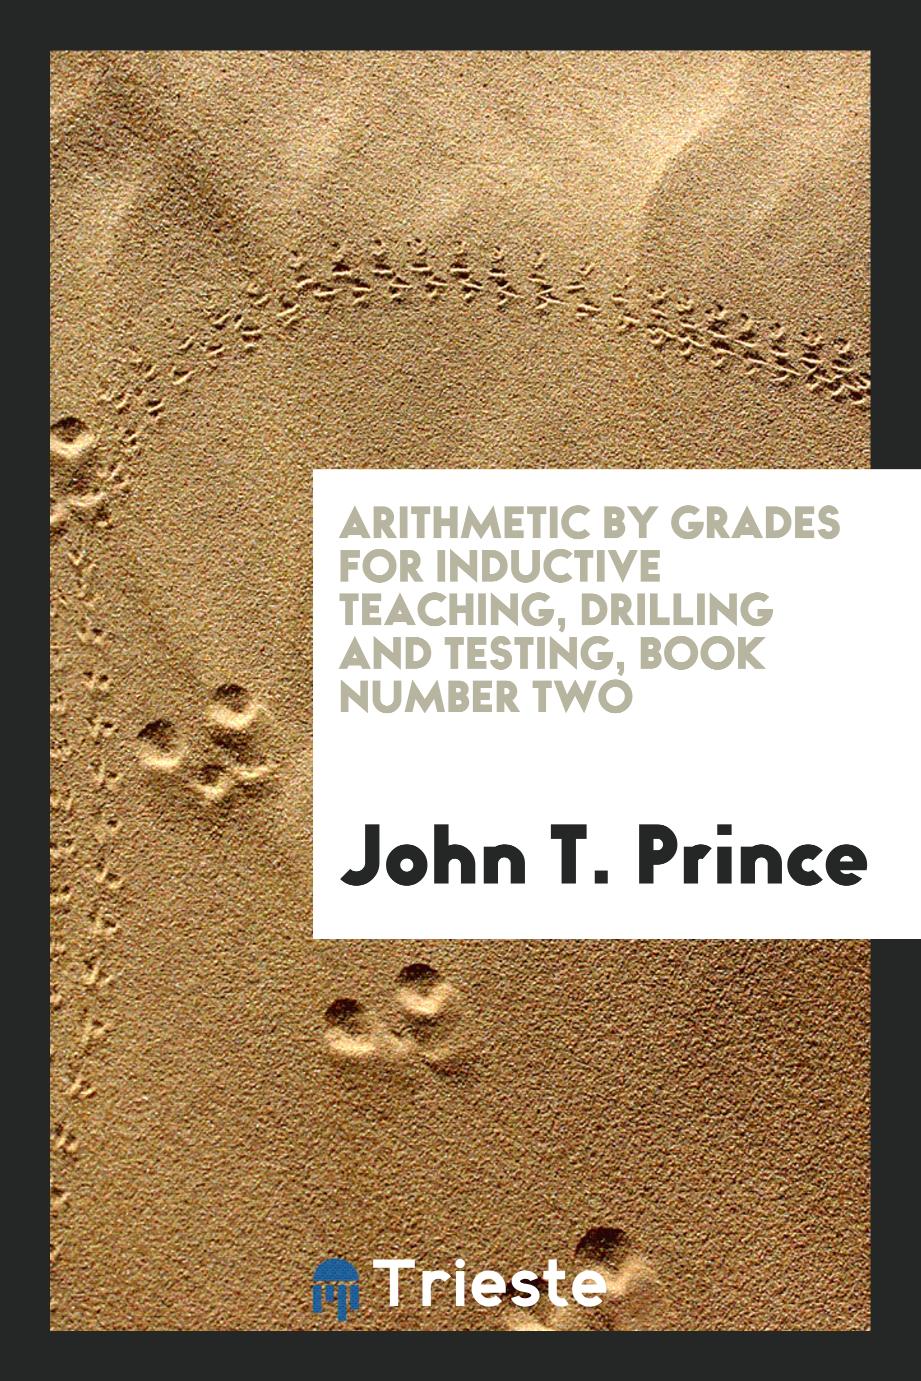 Arithmetic by Grades for Inductive Teaching, Drilling and Testing, Book Number Two